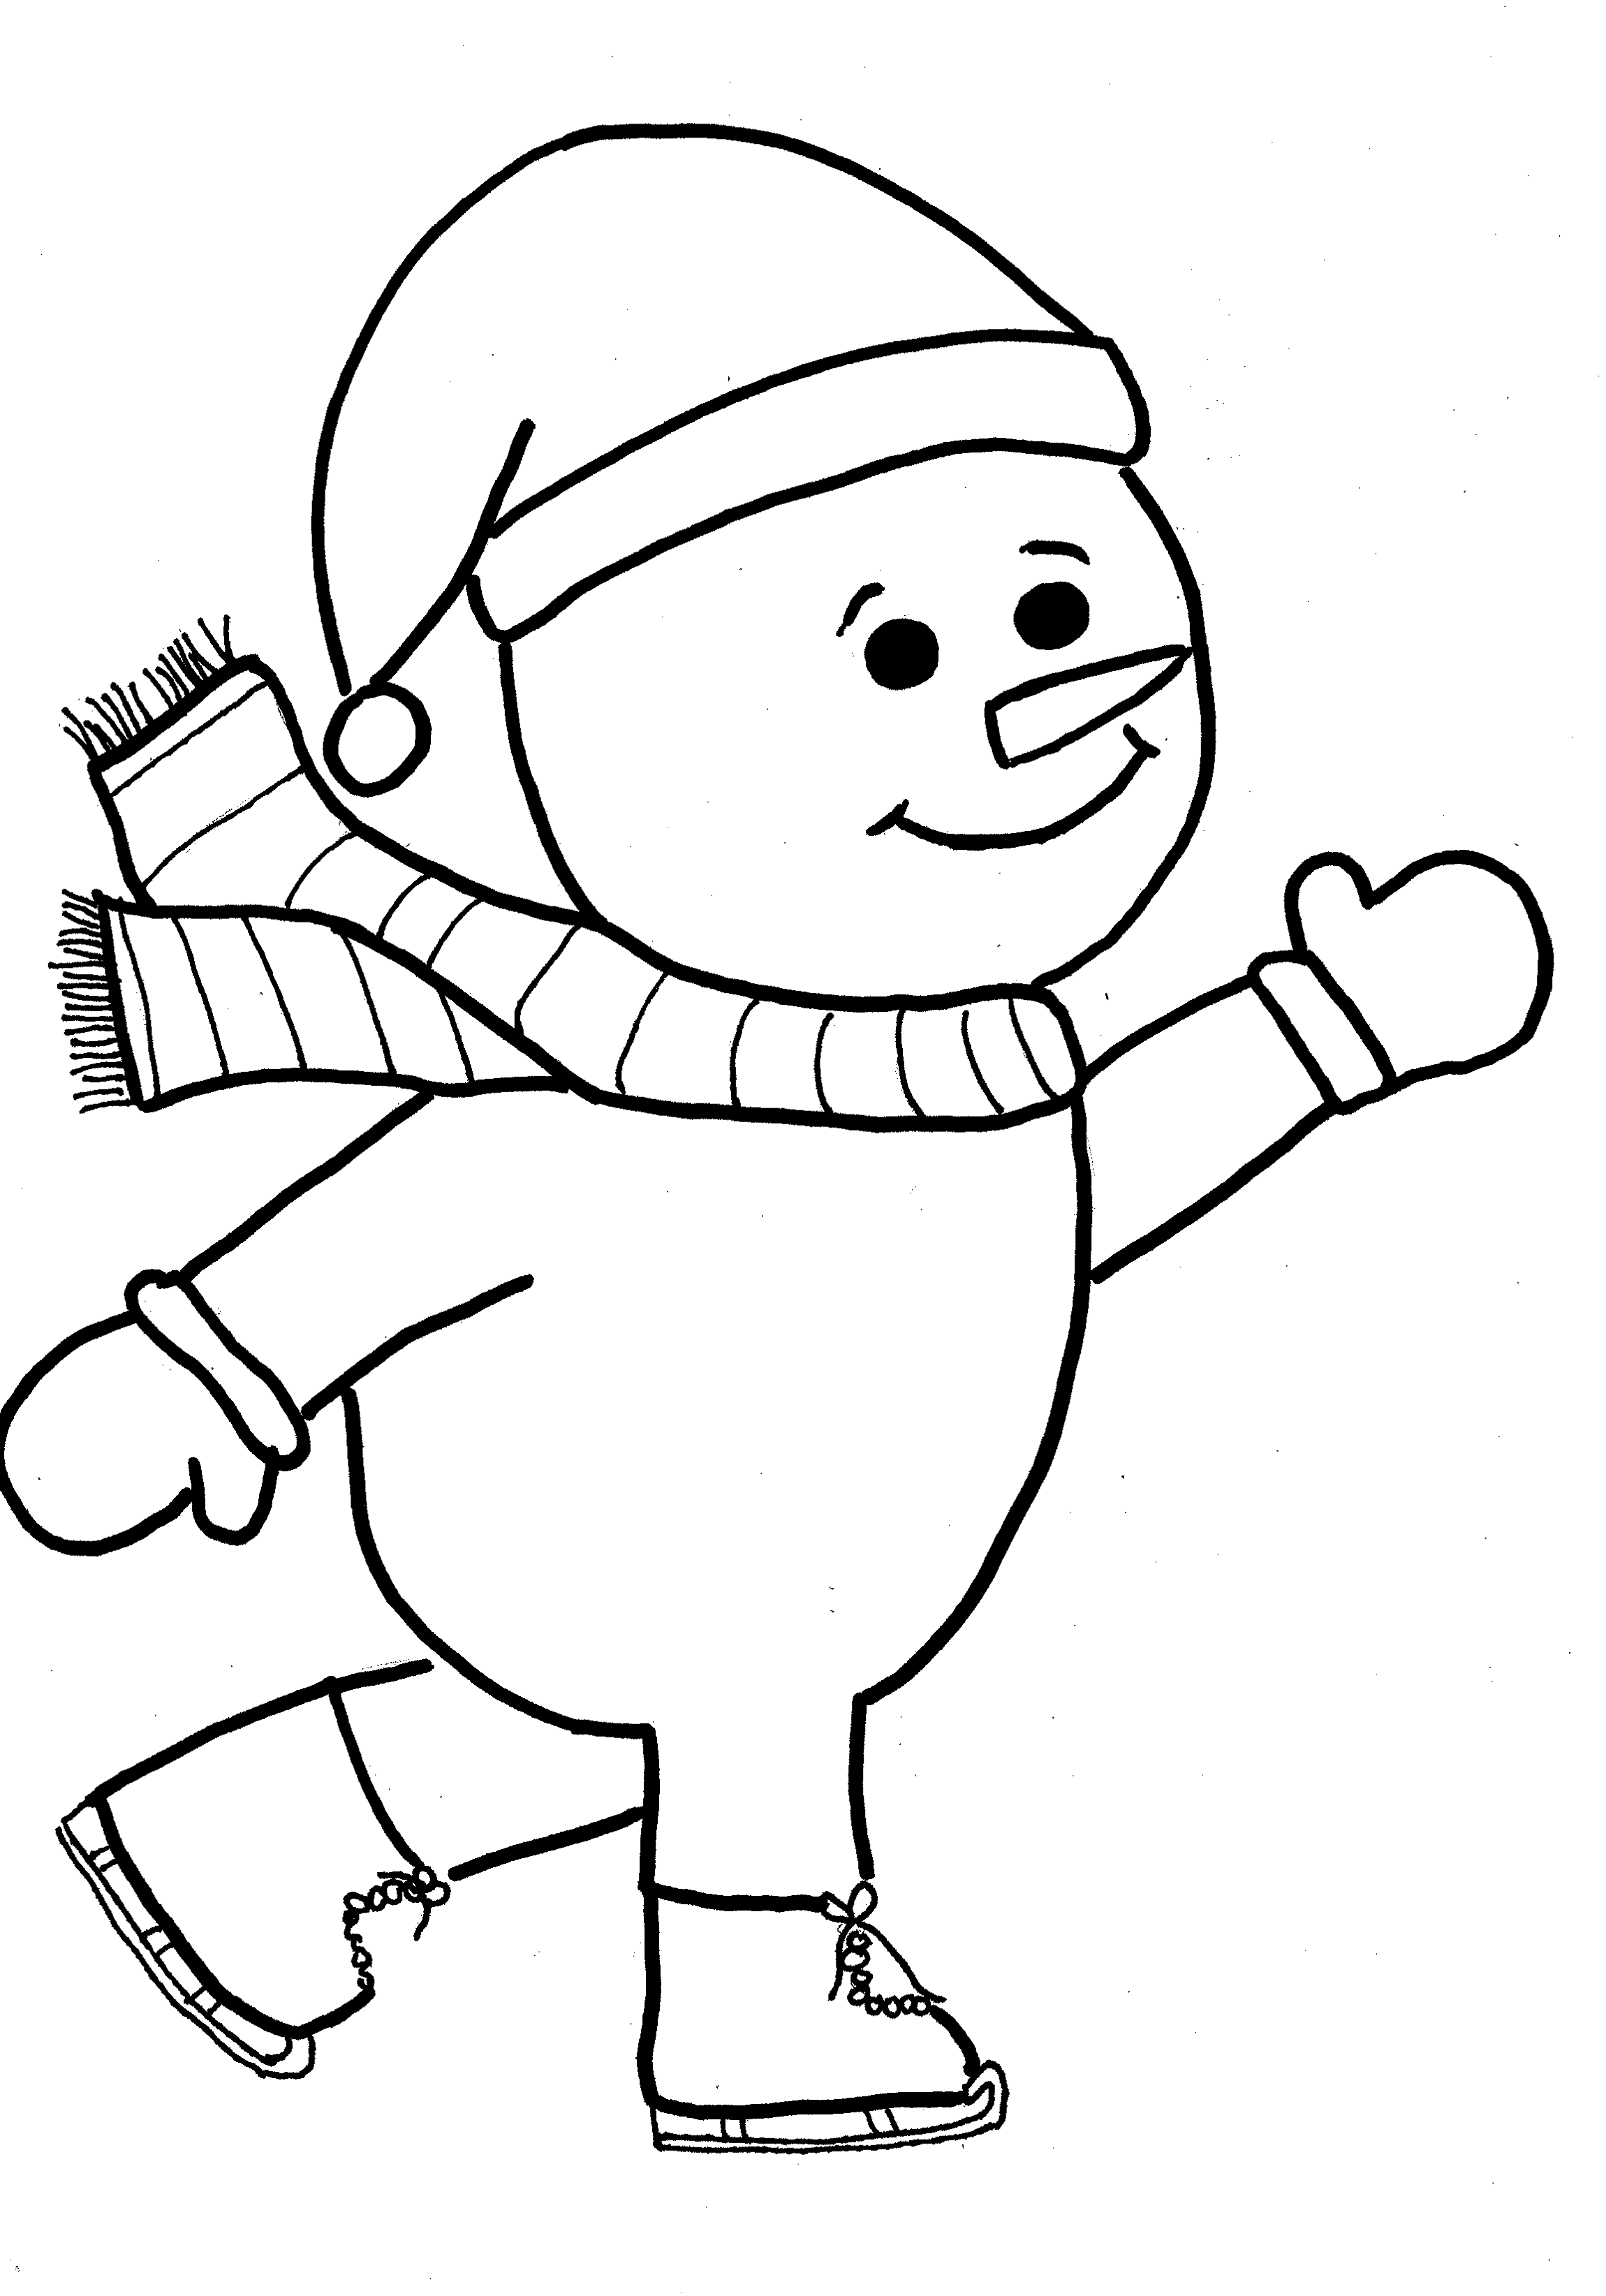 Coloring Pages to Print Snowman